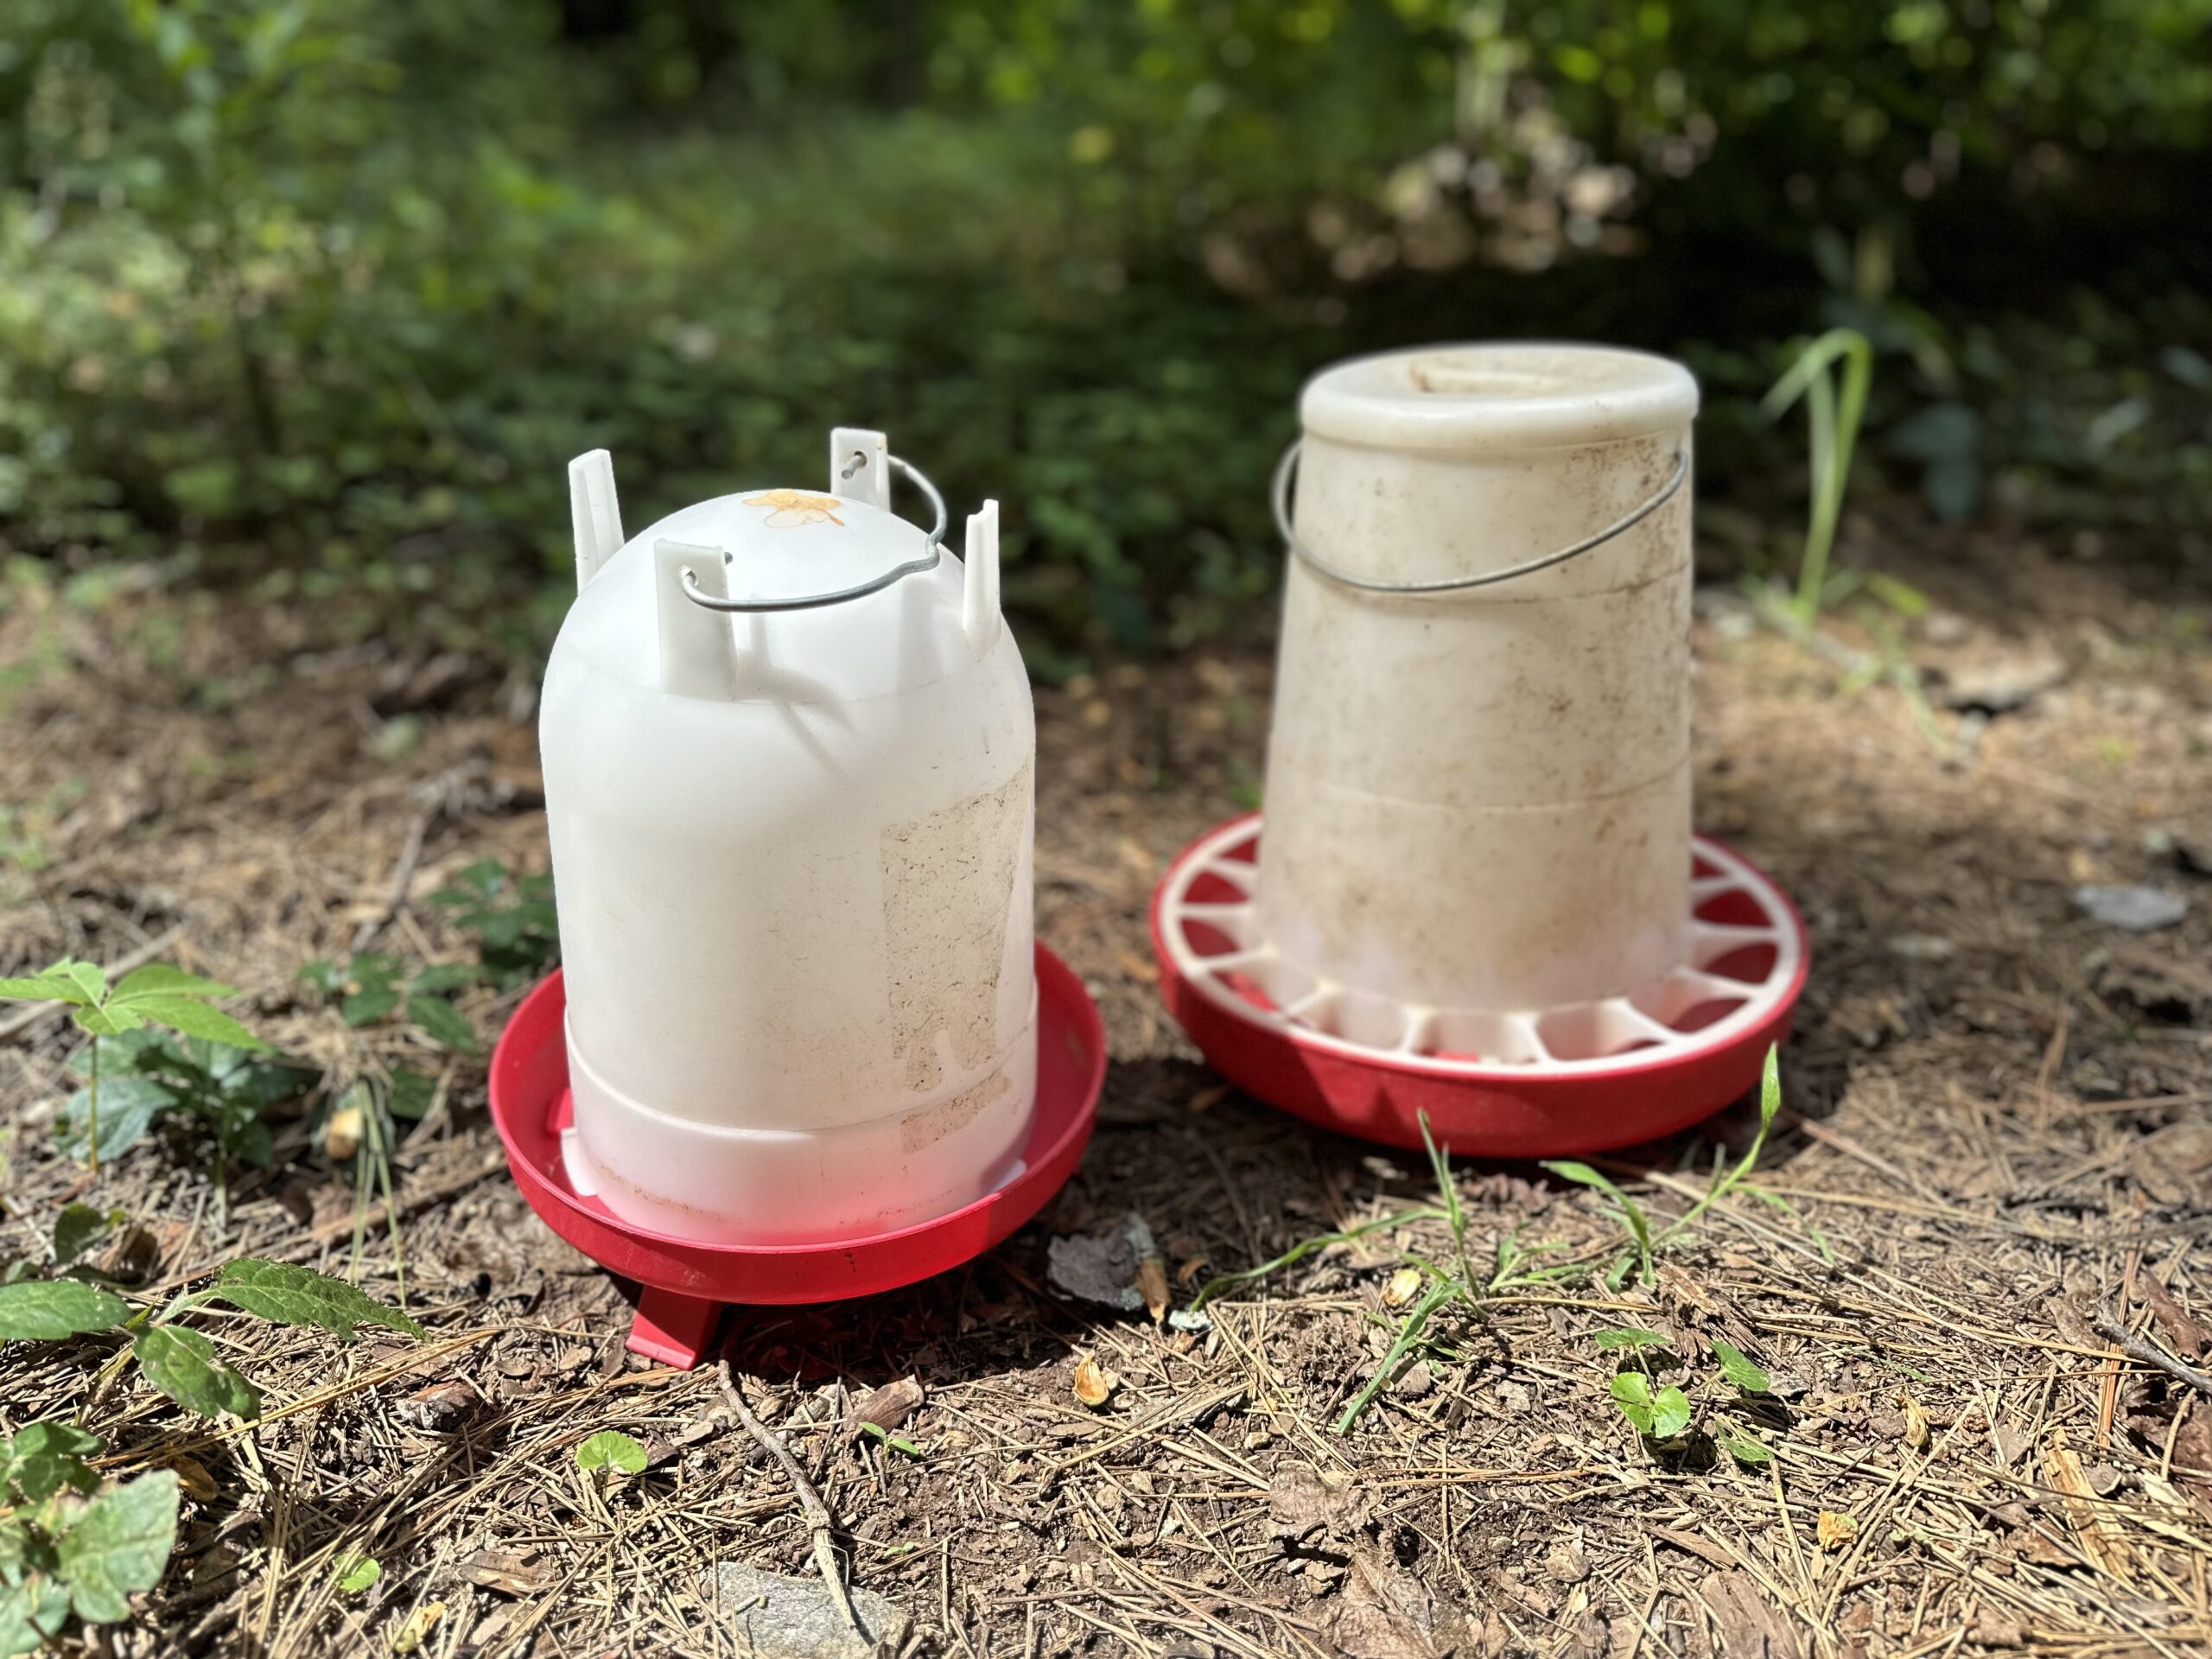 We use these duck feeders and waterers in our brooder.